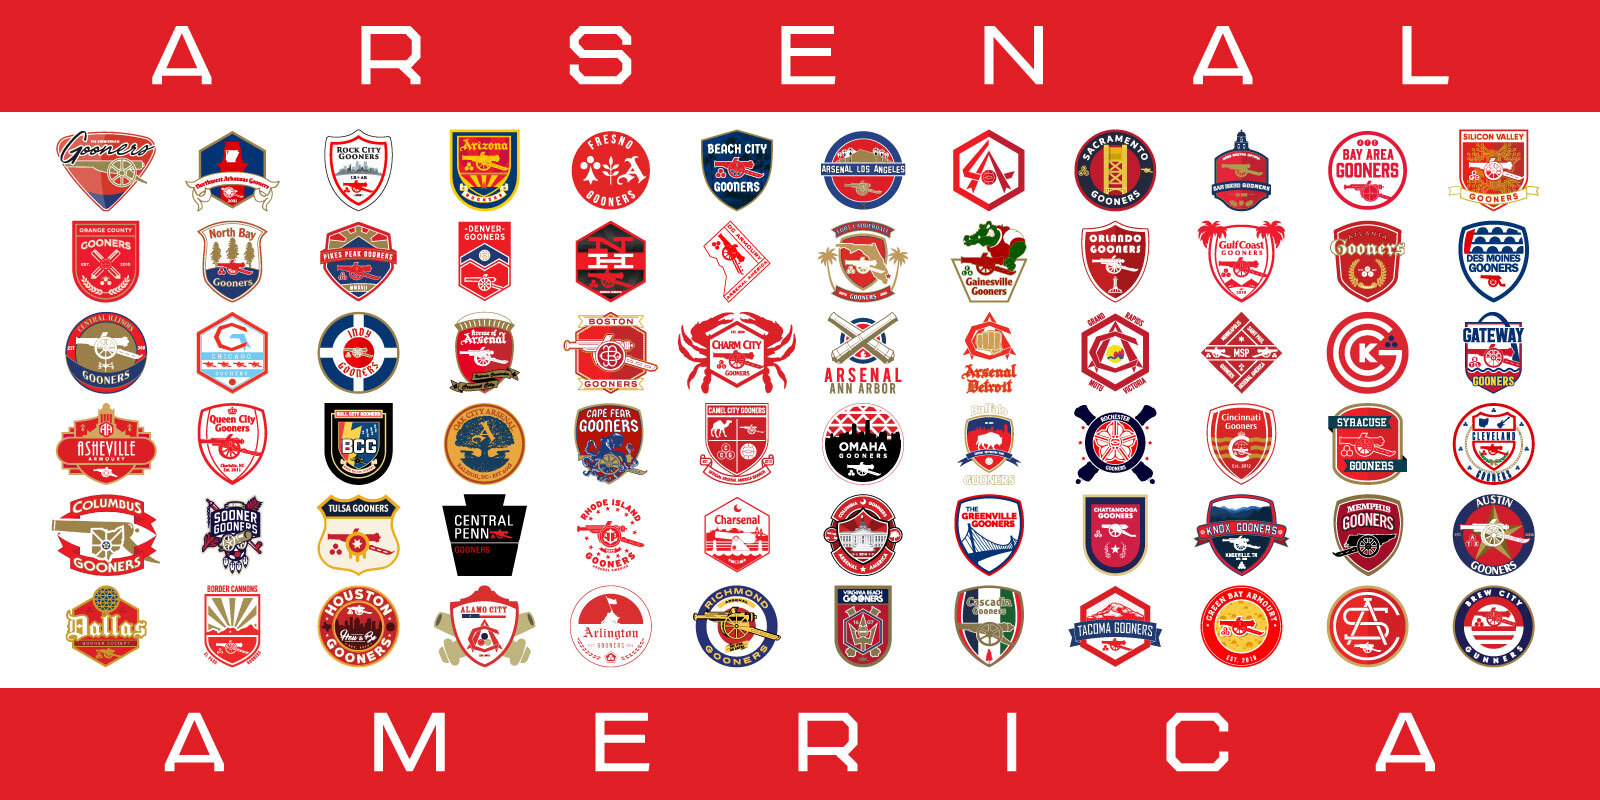 Official branches of Arsenal America